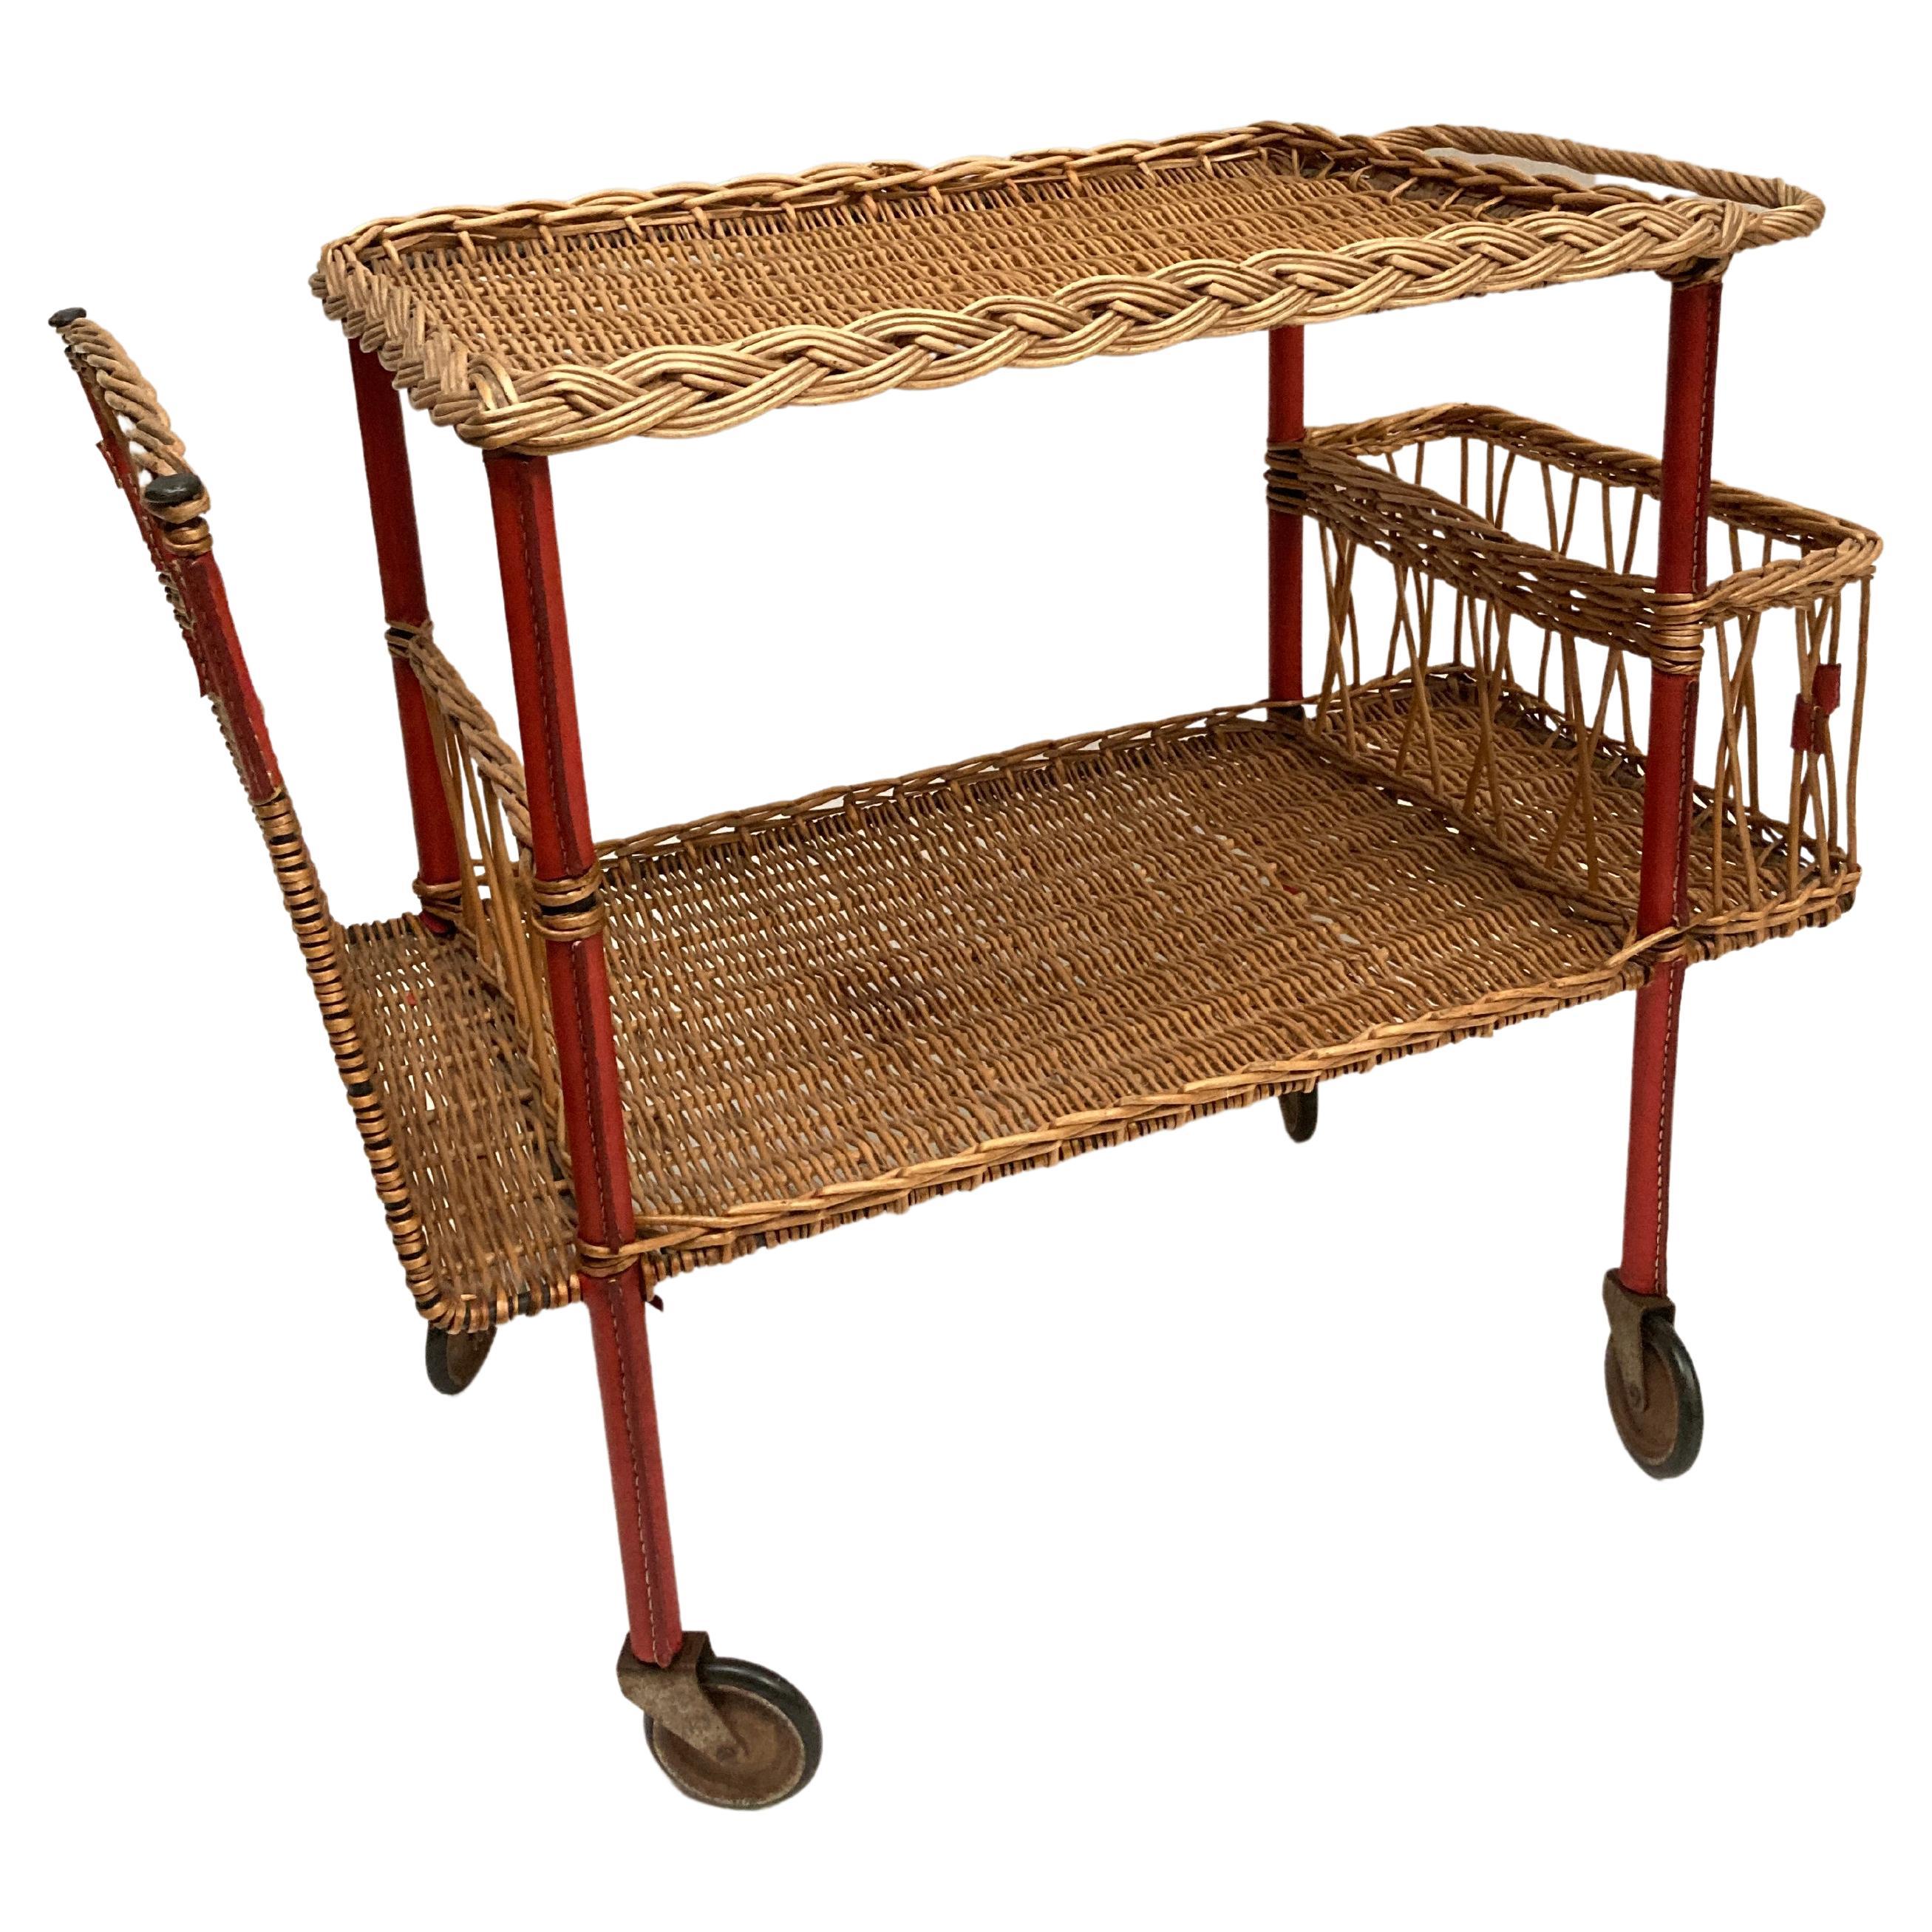 1950's Stitched leather and rattan bar cart by Jacques Adnet